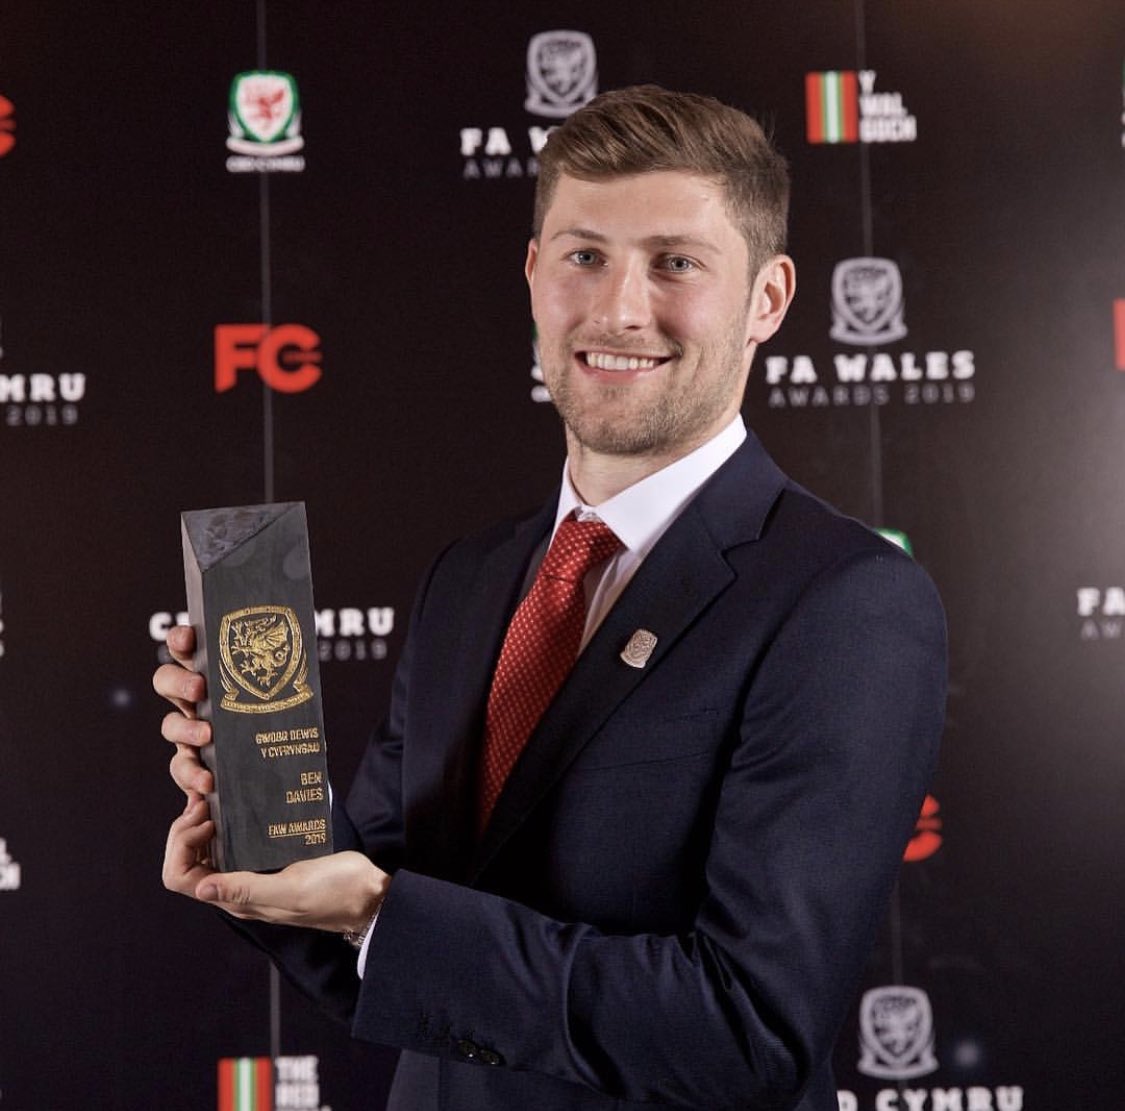 Such a special honour to receive the Media Choice Award last night #FAWAwards2019